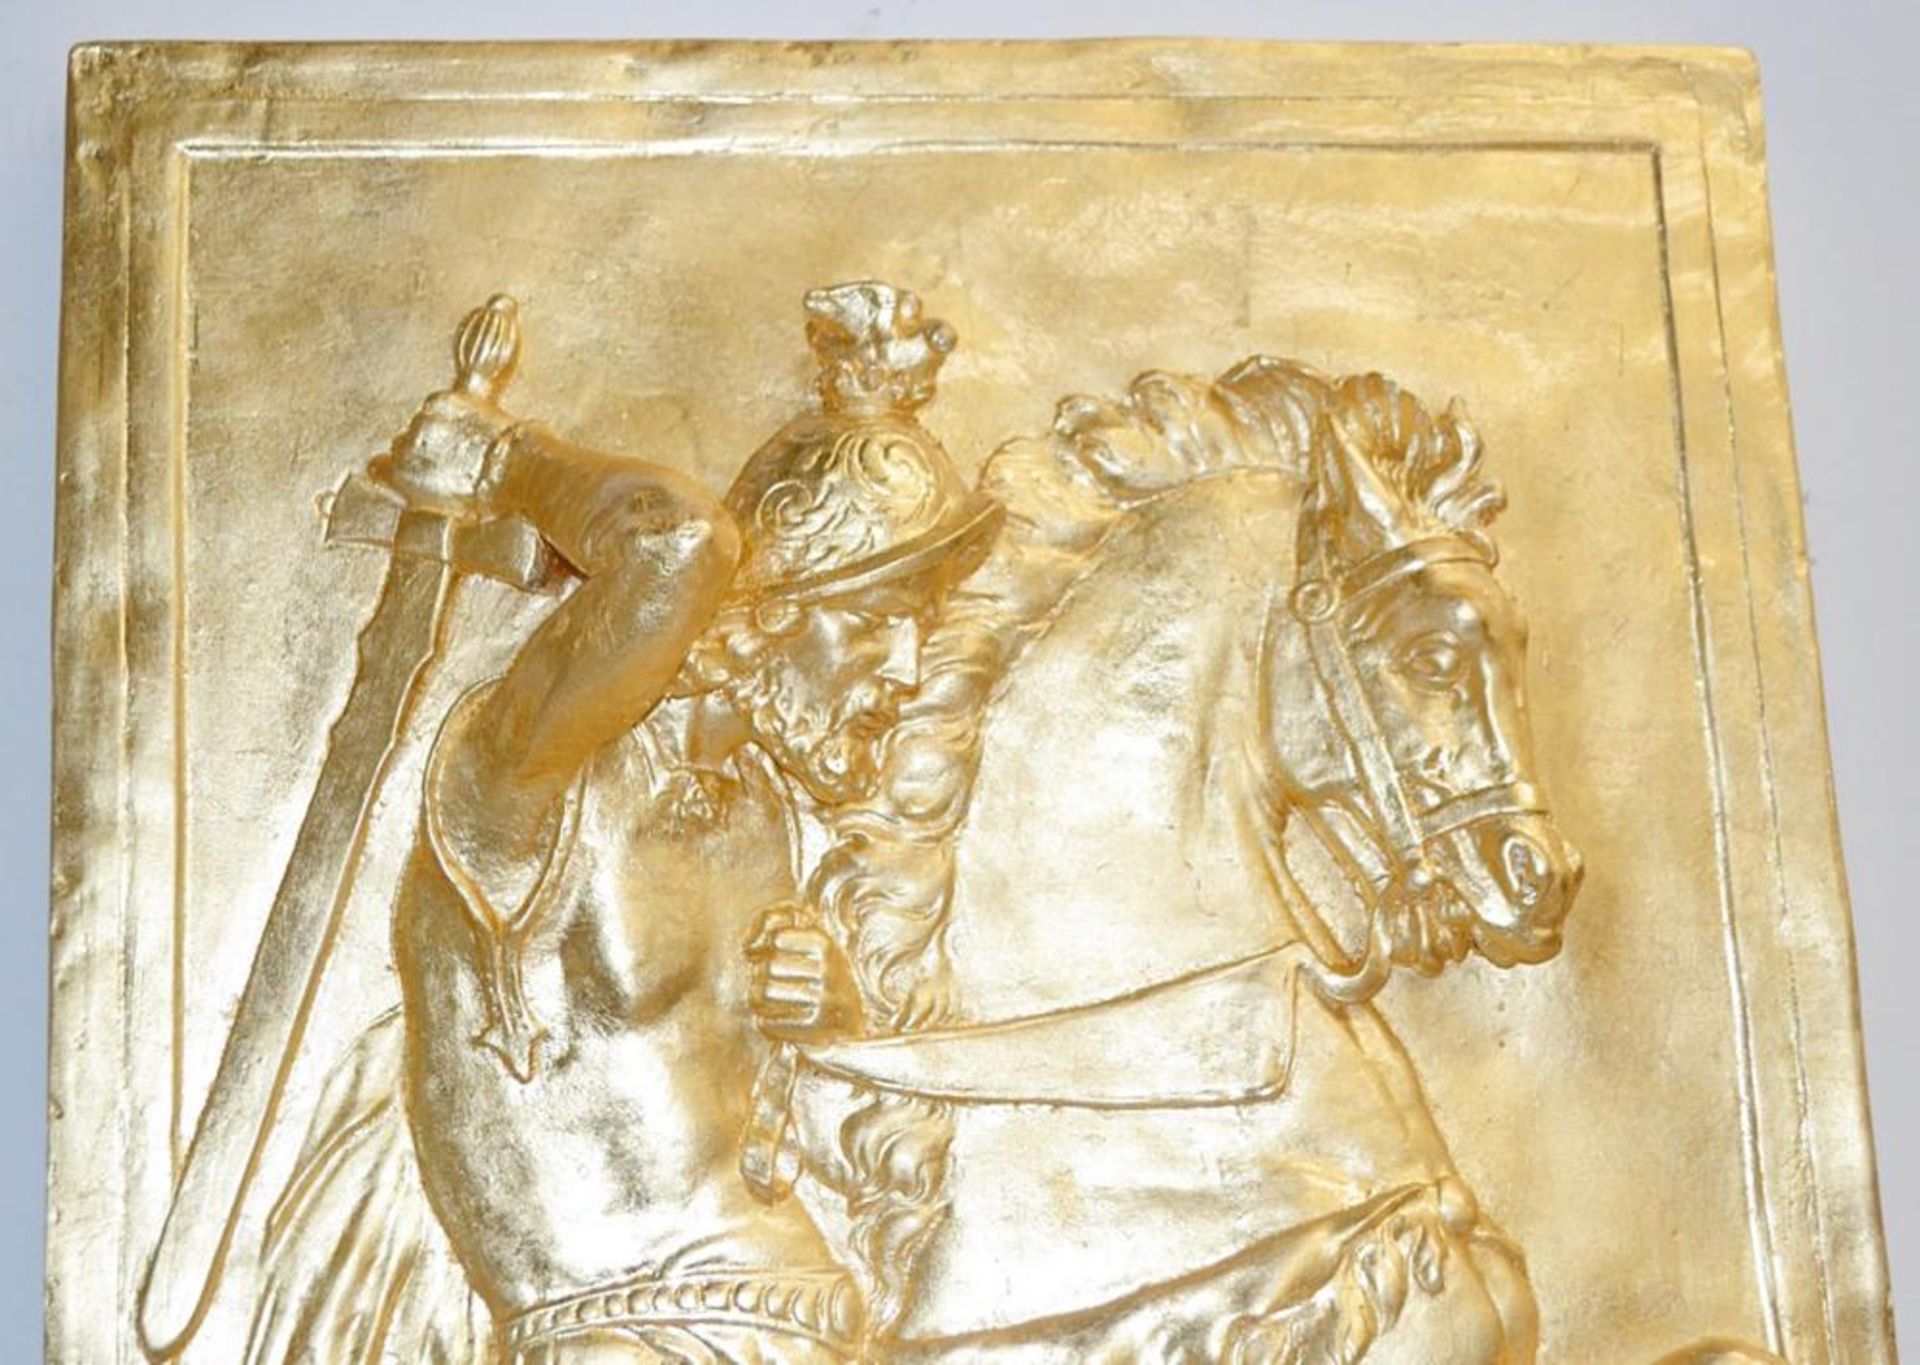 1 x Giorgio Collection 'Art & Accessories' Plaster Bas Relief Hanging Depicting St. George In A Gold - Image 3 of 8